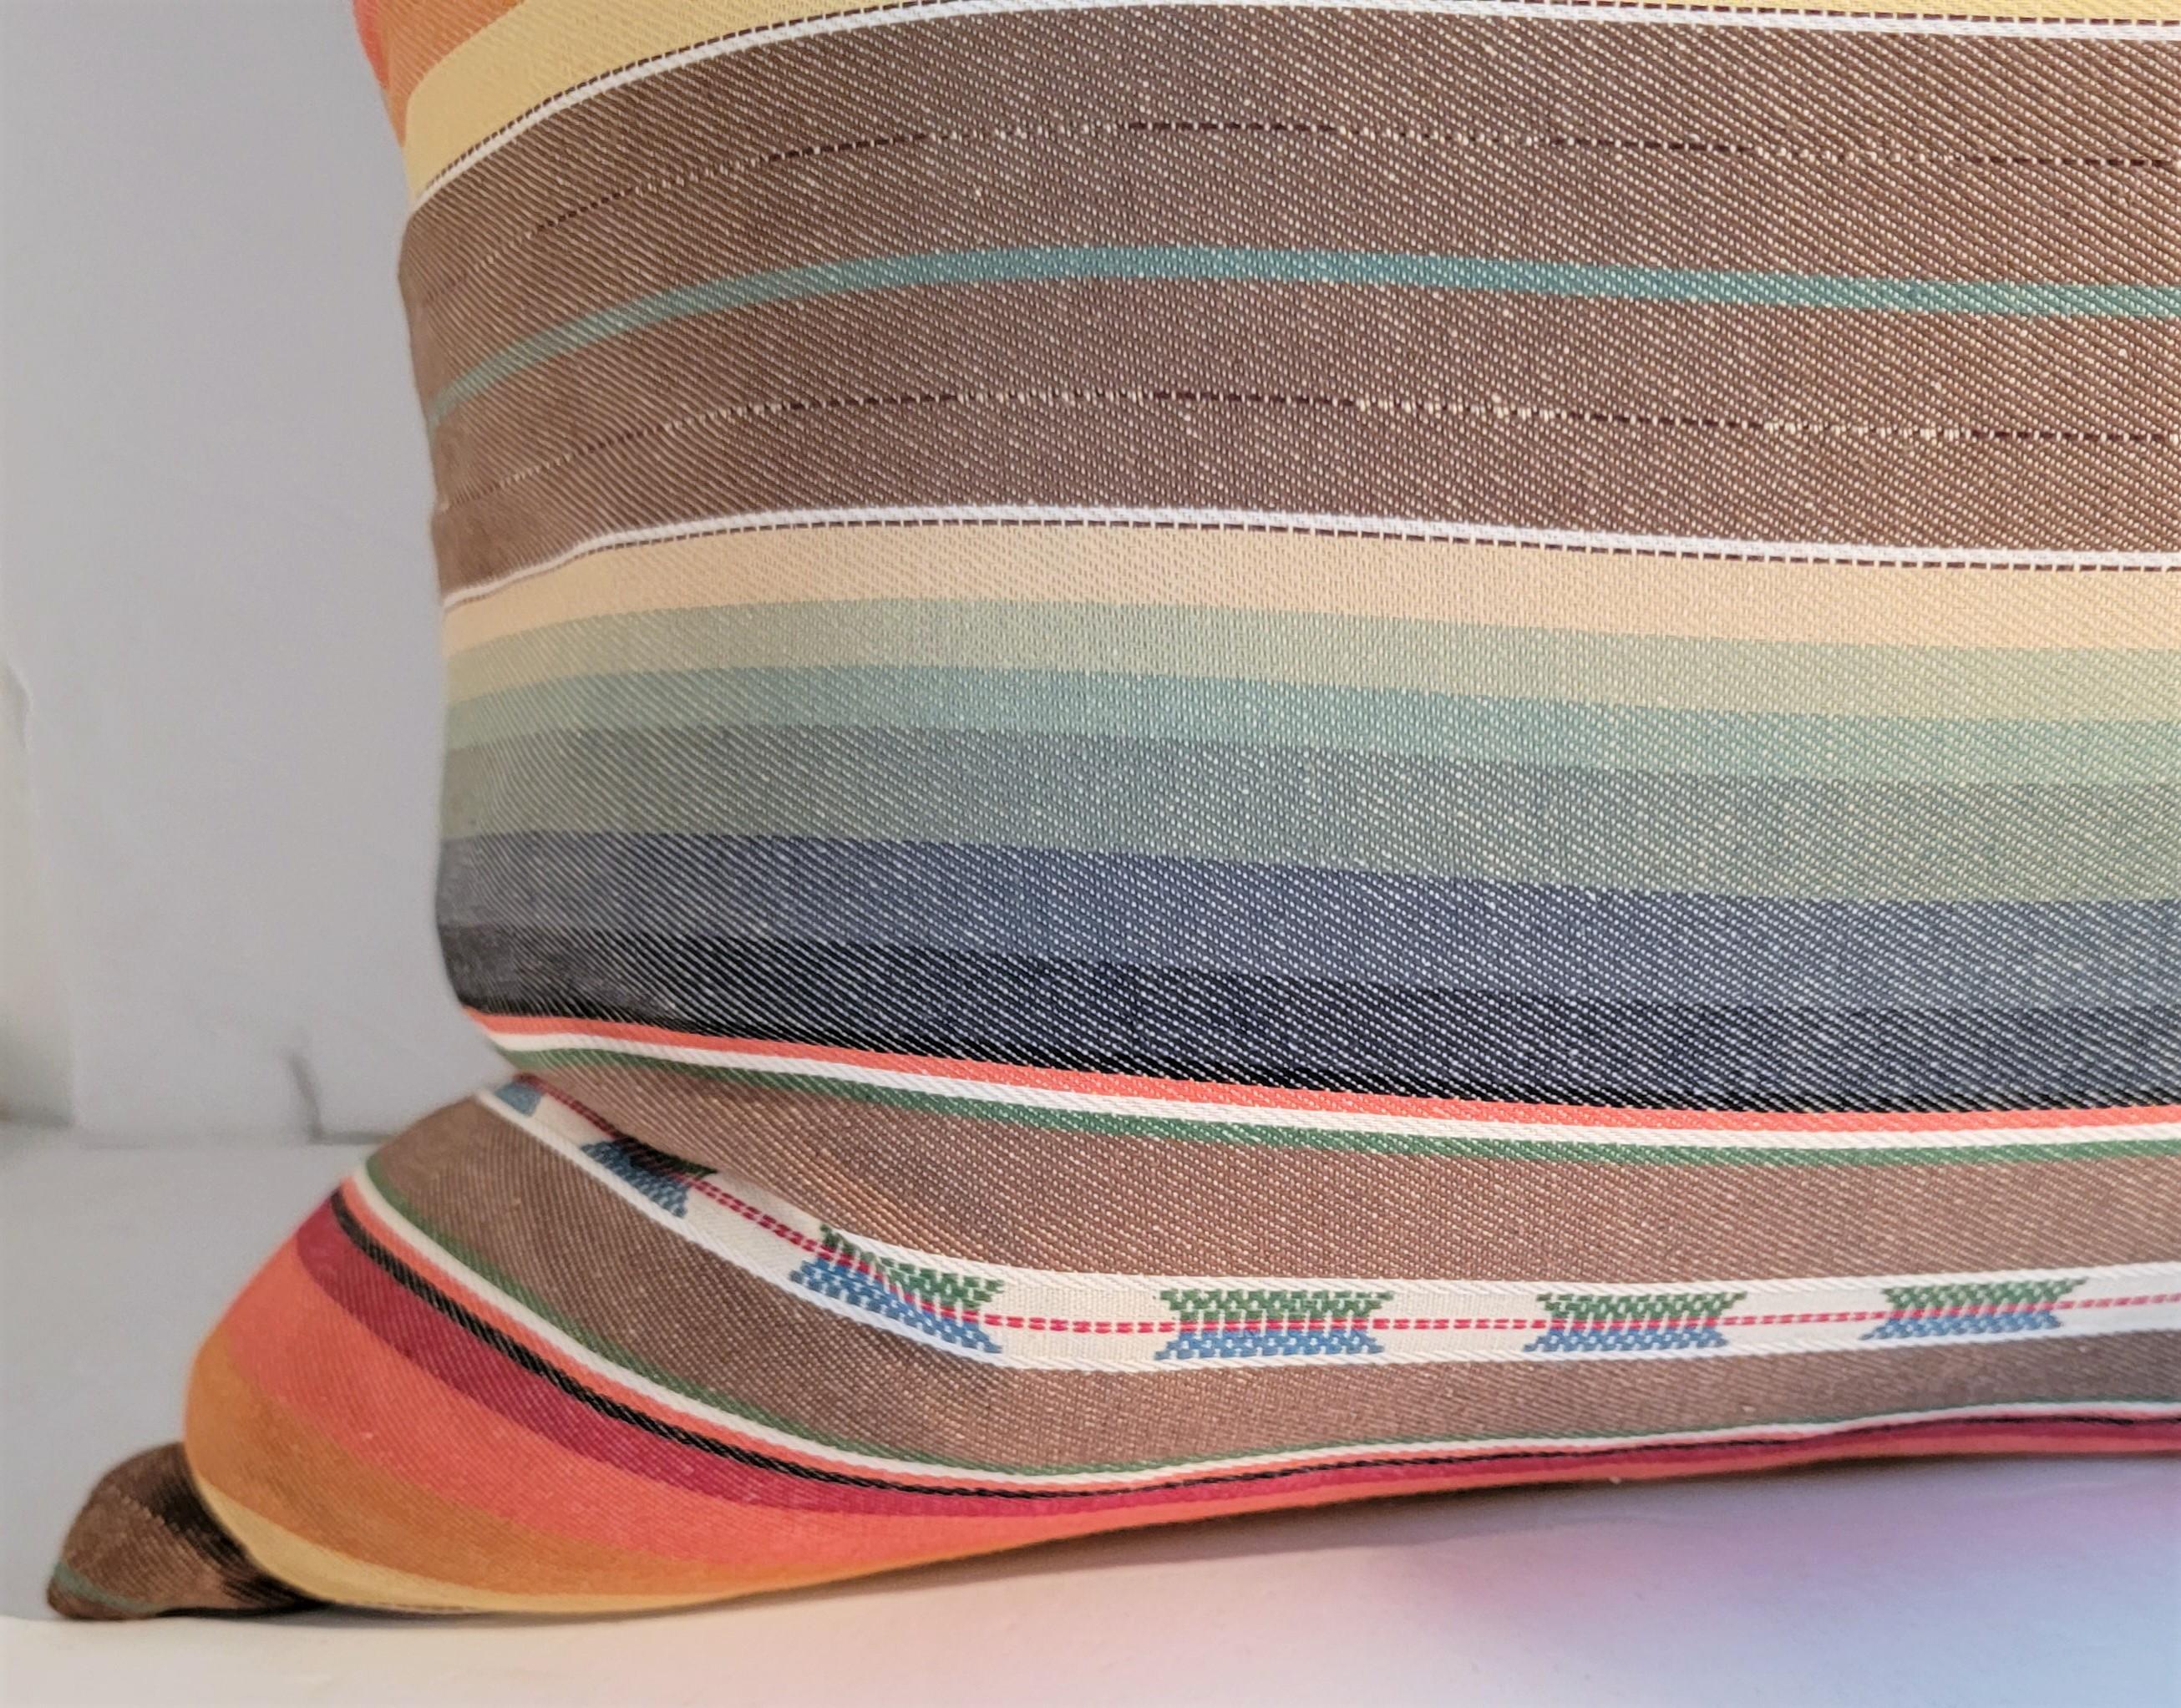 Serape Pillow In Good Condition For Sale In Los Angeles, CA